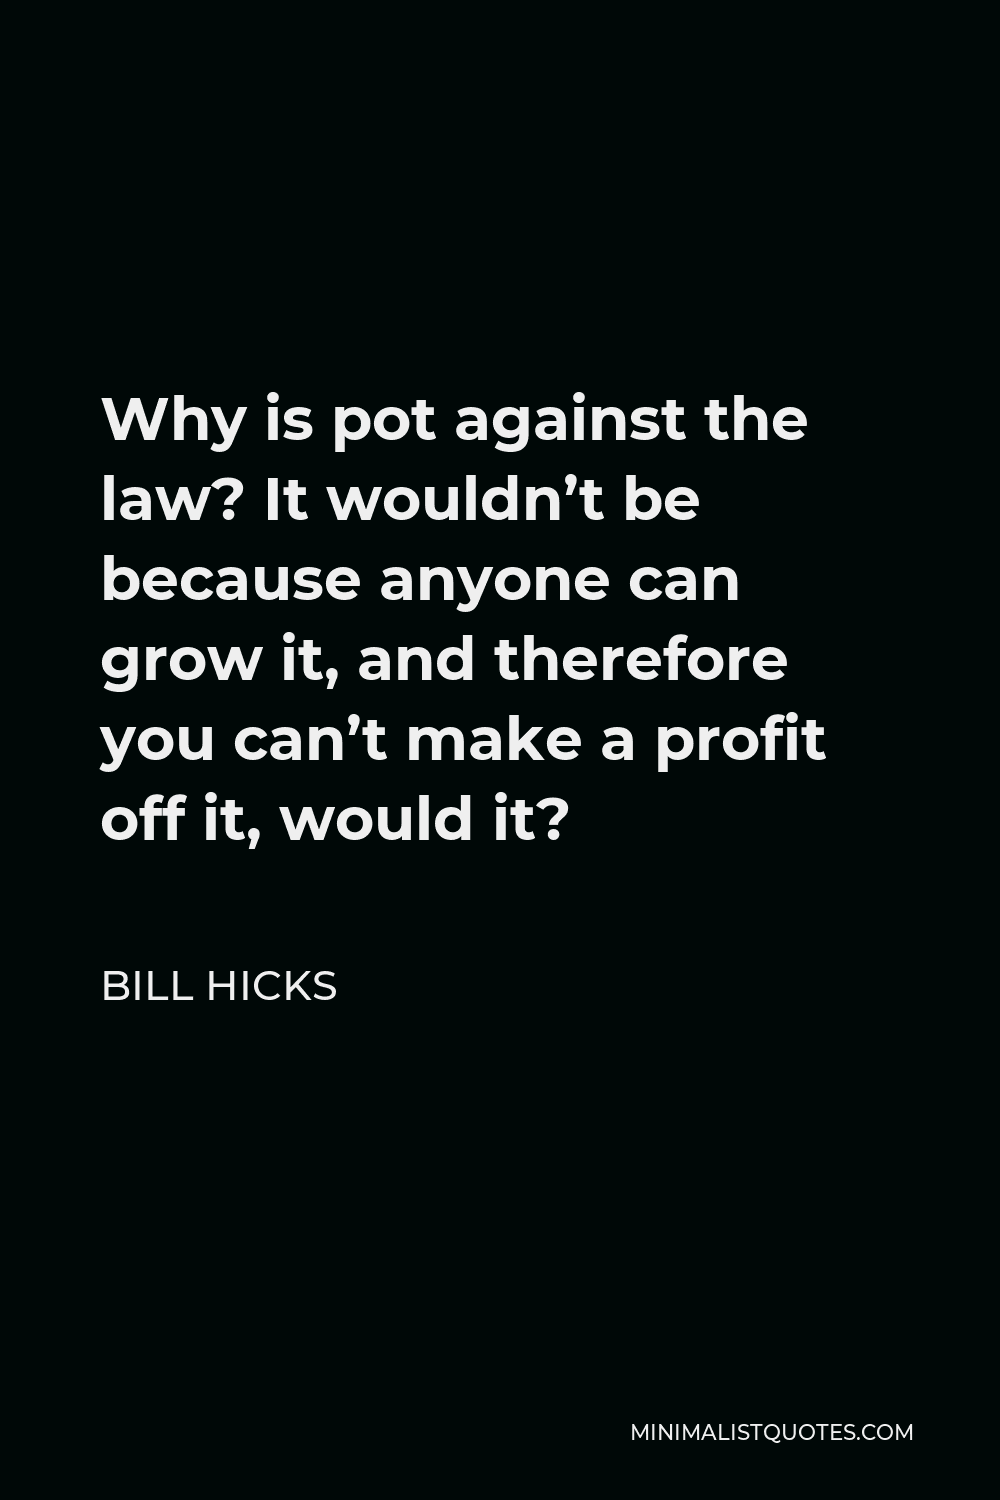 Bill Hicks Quote - Why is pot against the law? It wouldn’t be because anyone can grow it, and therefore you can’t make a profit off it, would it?